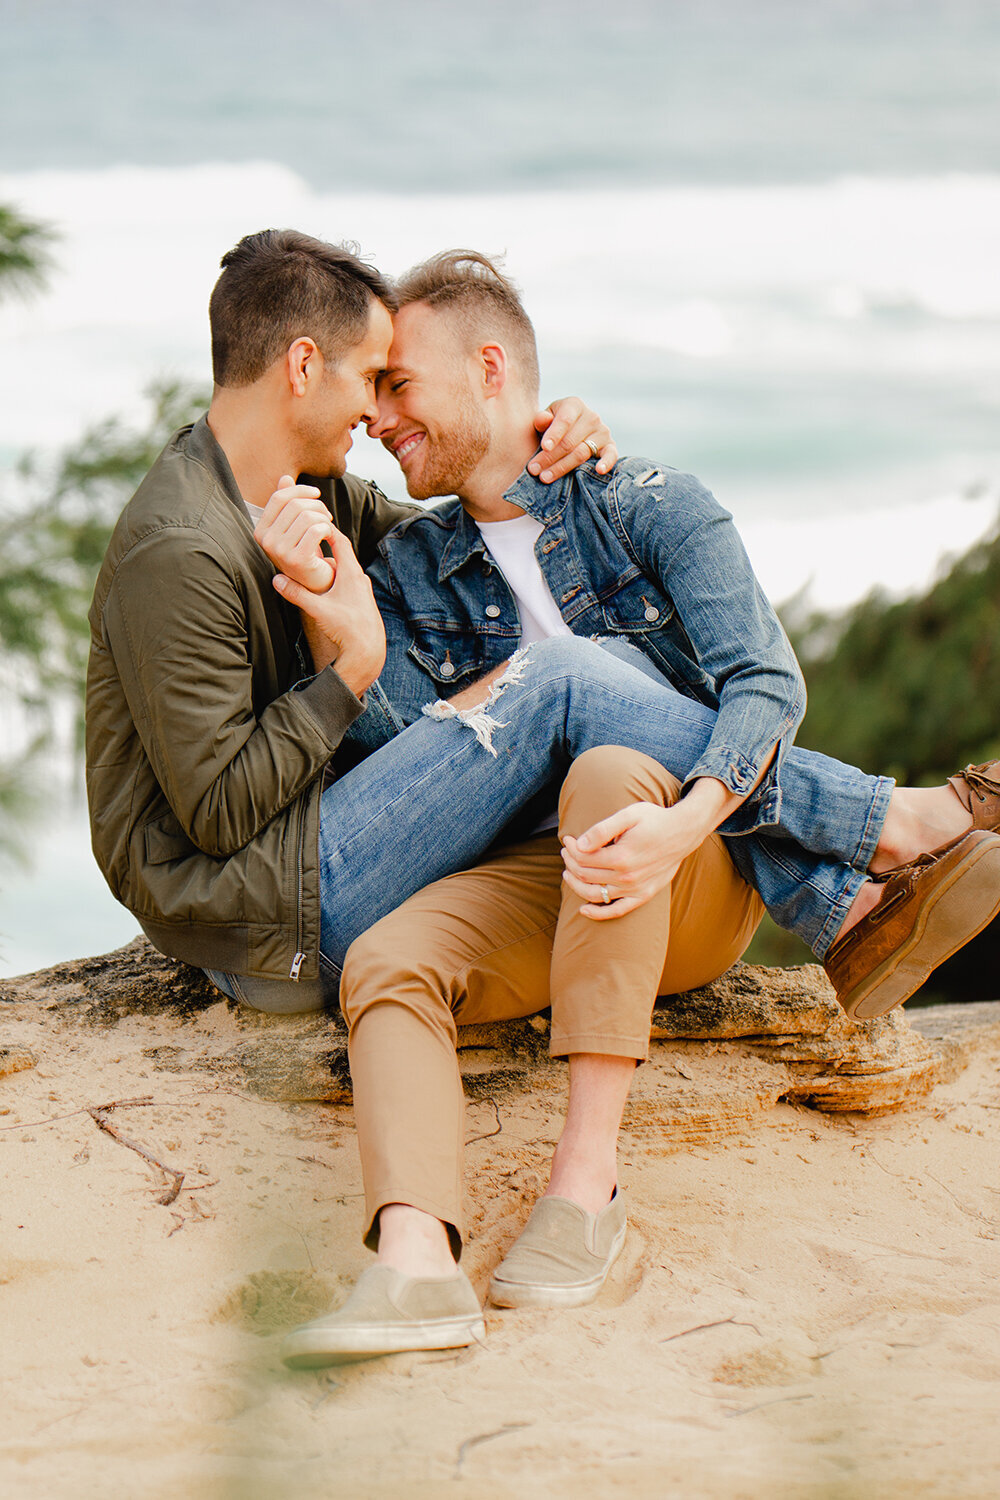 LGBT couples session on a secluded beach in Hawaii. A man sits on the beach with his boyfriend's legs wrapped around him.